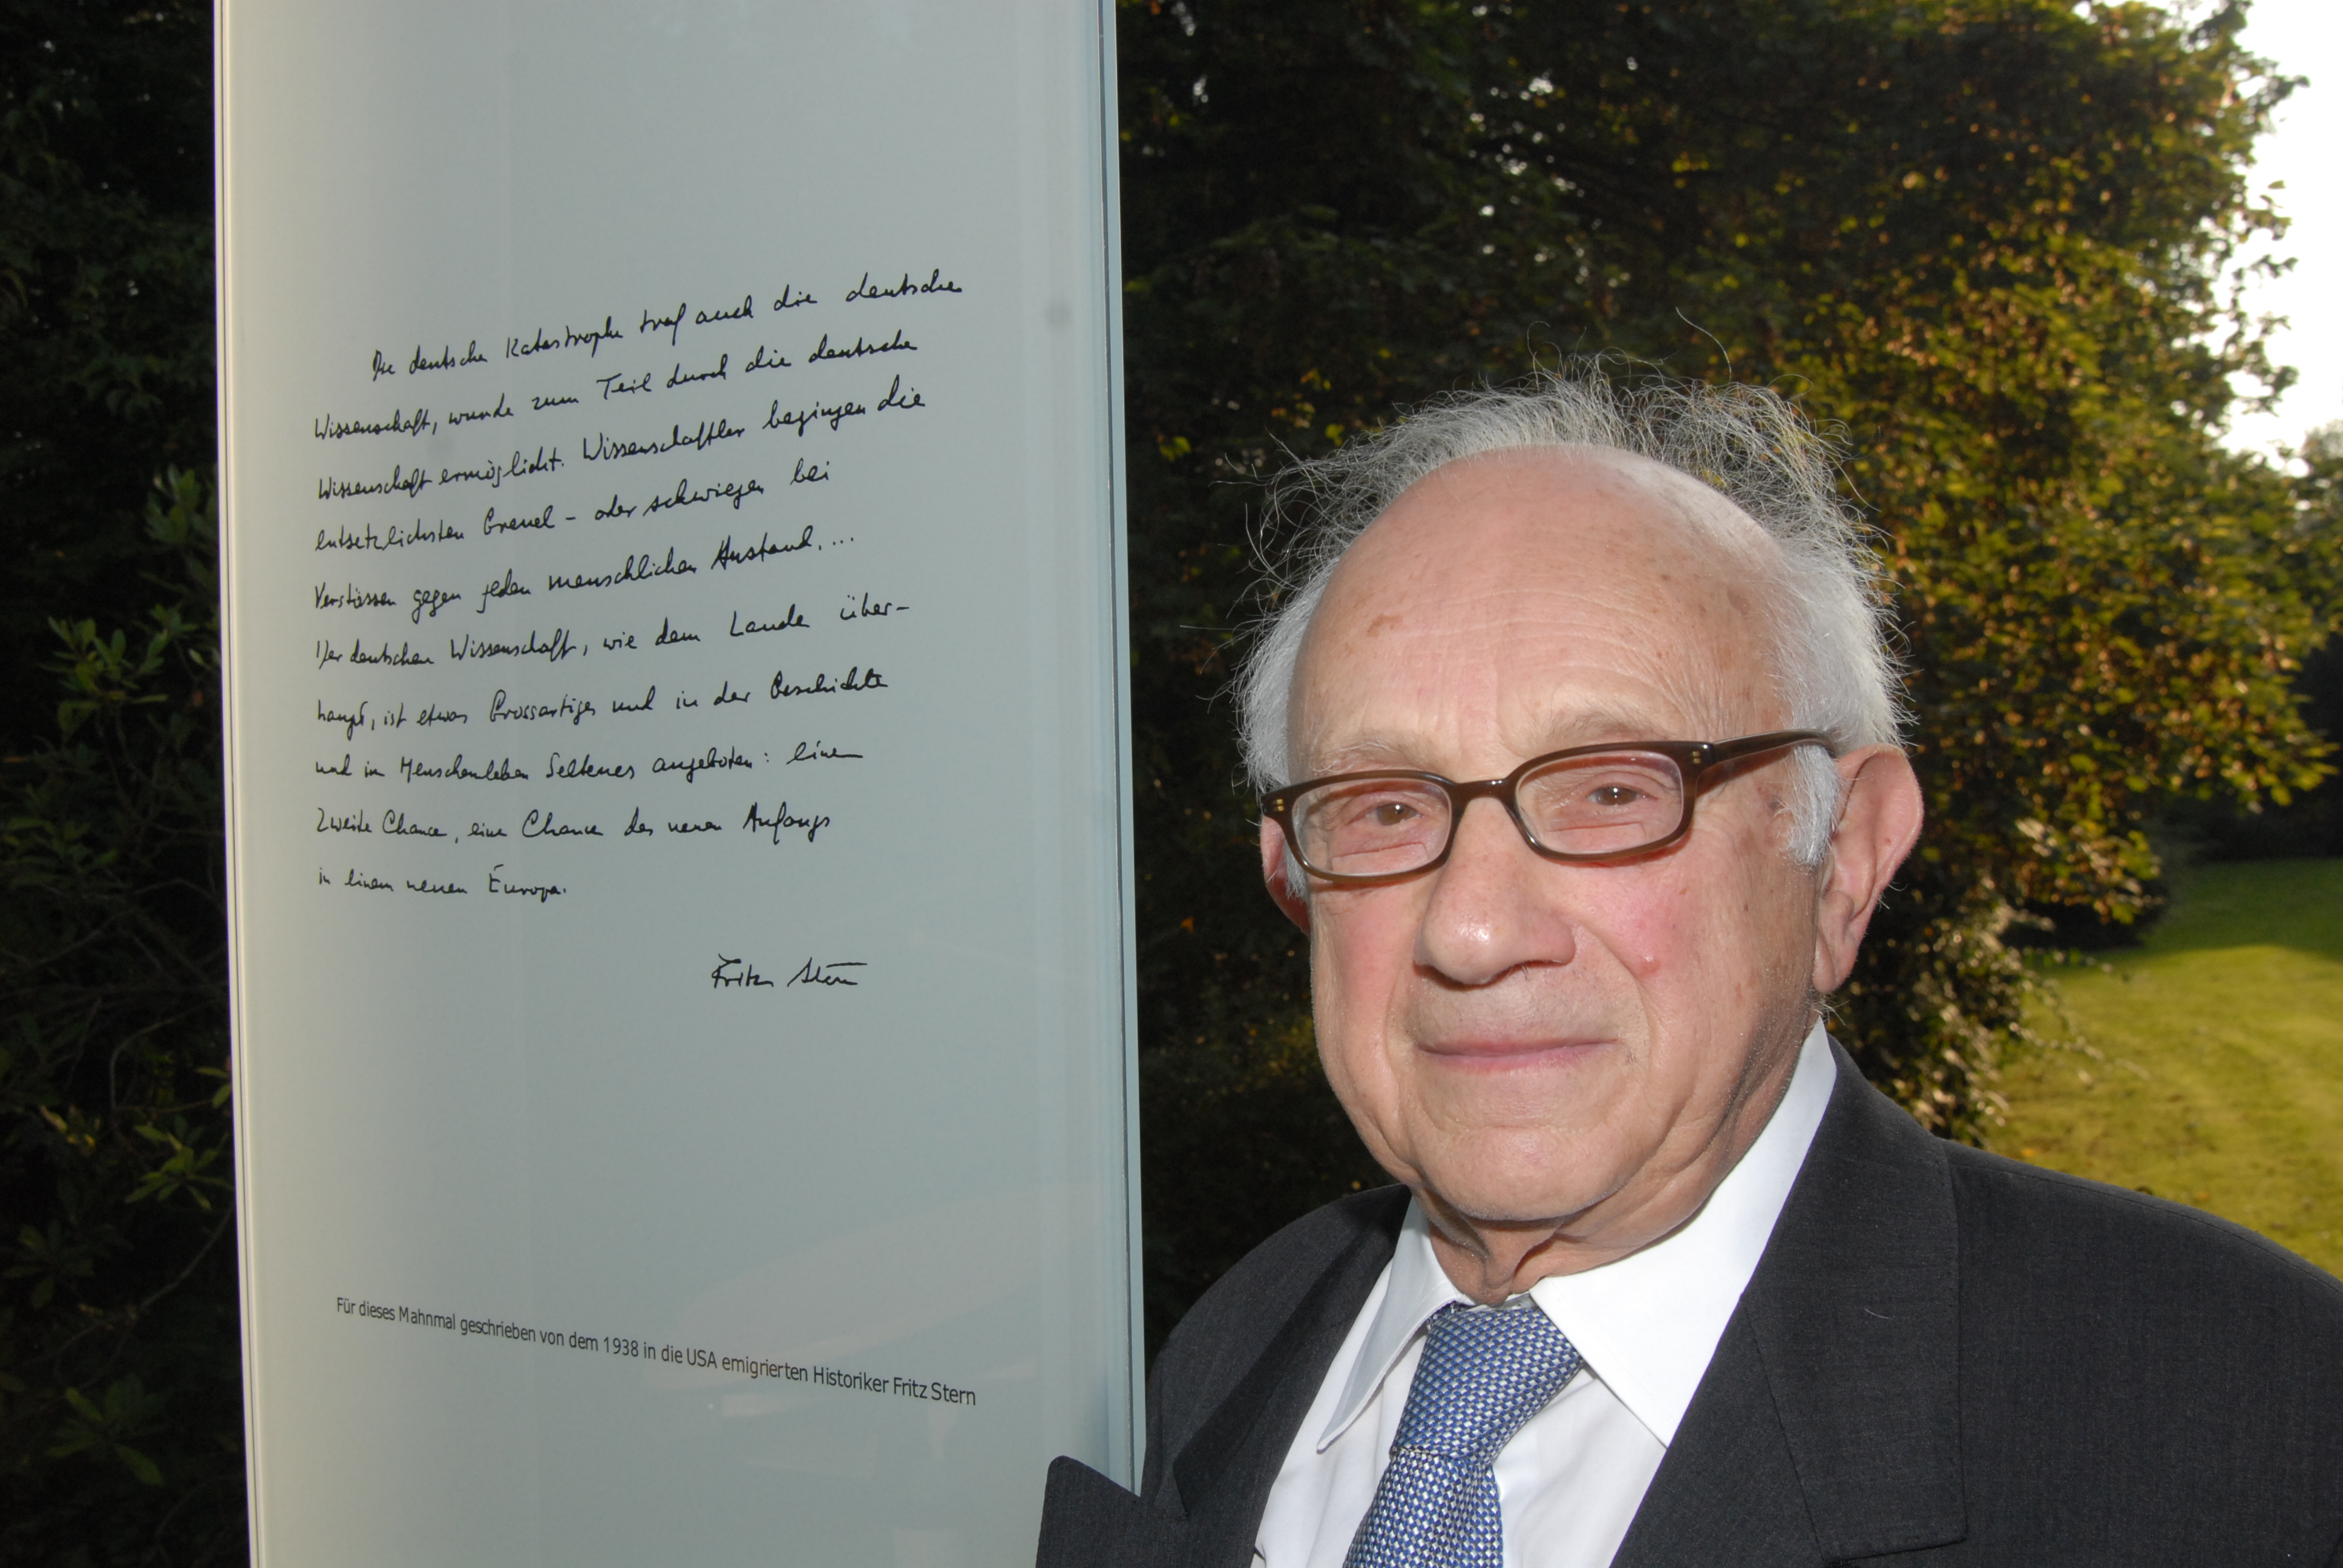 Historian Fritz Stern, who emigrated to the USA in 1938, in front of the text he wrote